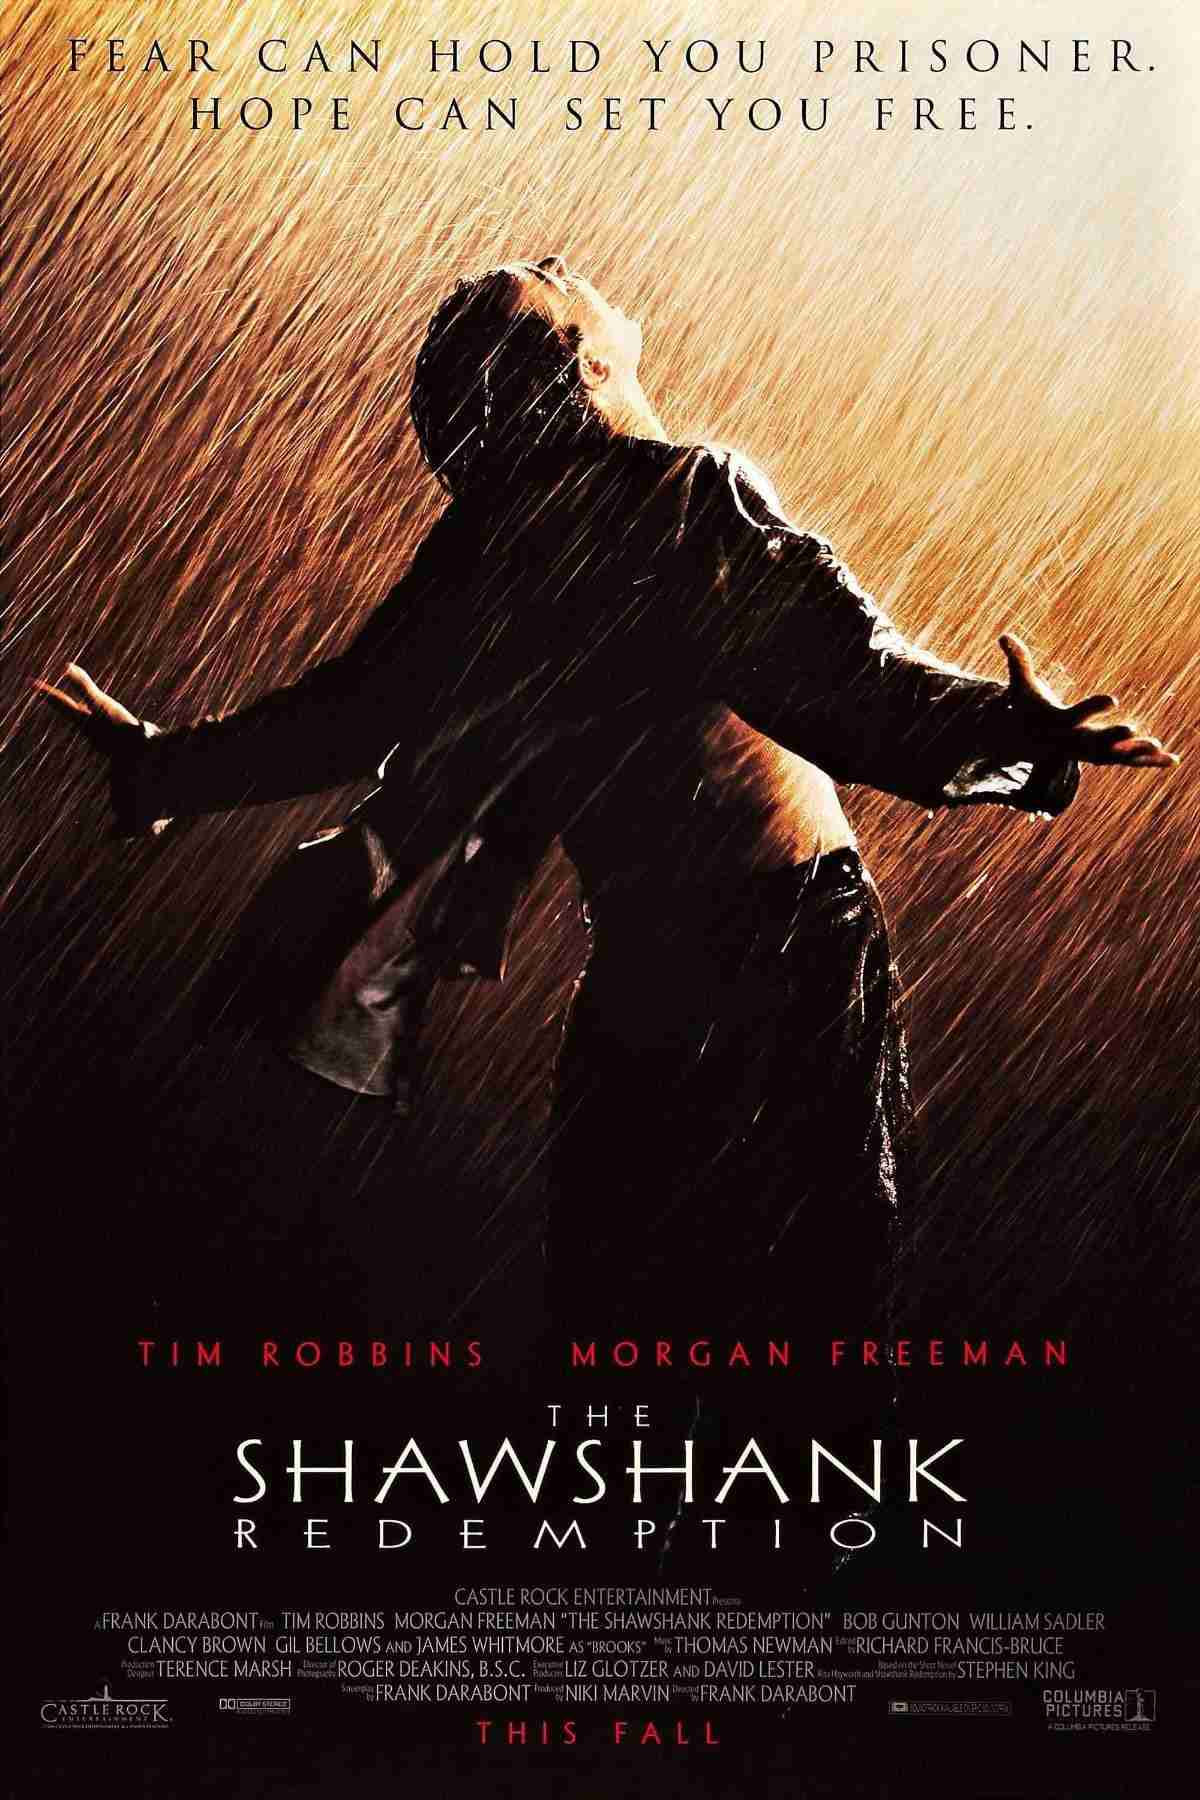 In The Shawshank Redemption, it’s revealed Andy did not kill his wife. But how is he supposed to be redeemed if he was never bad? What a stupid title.